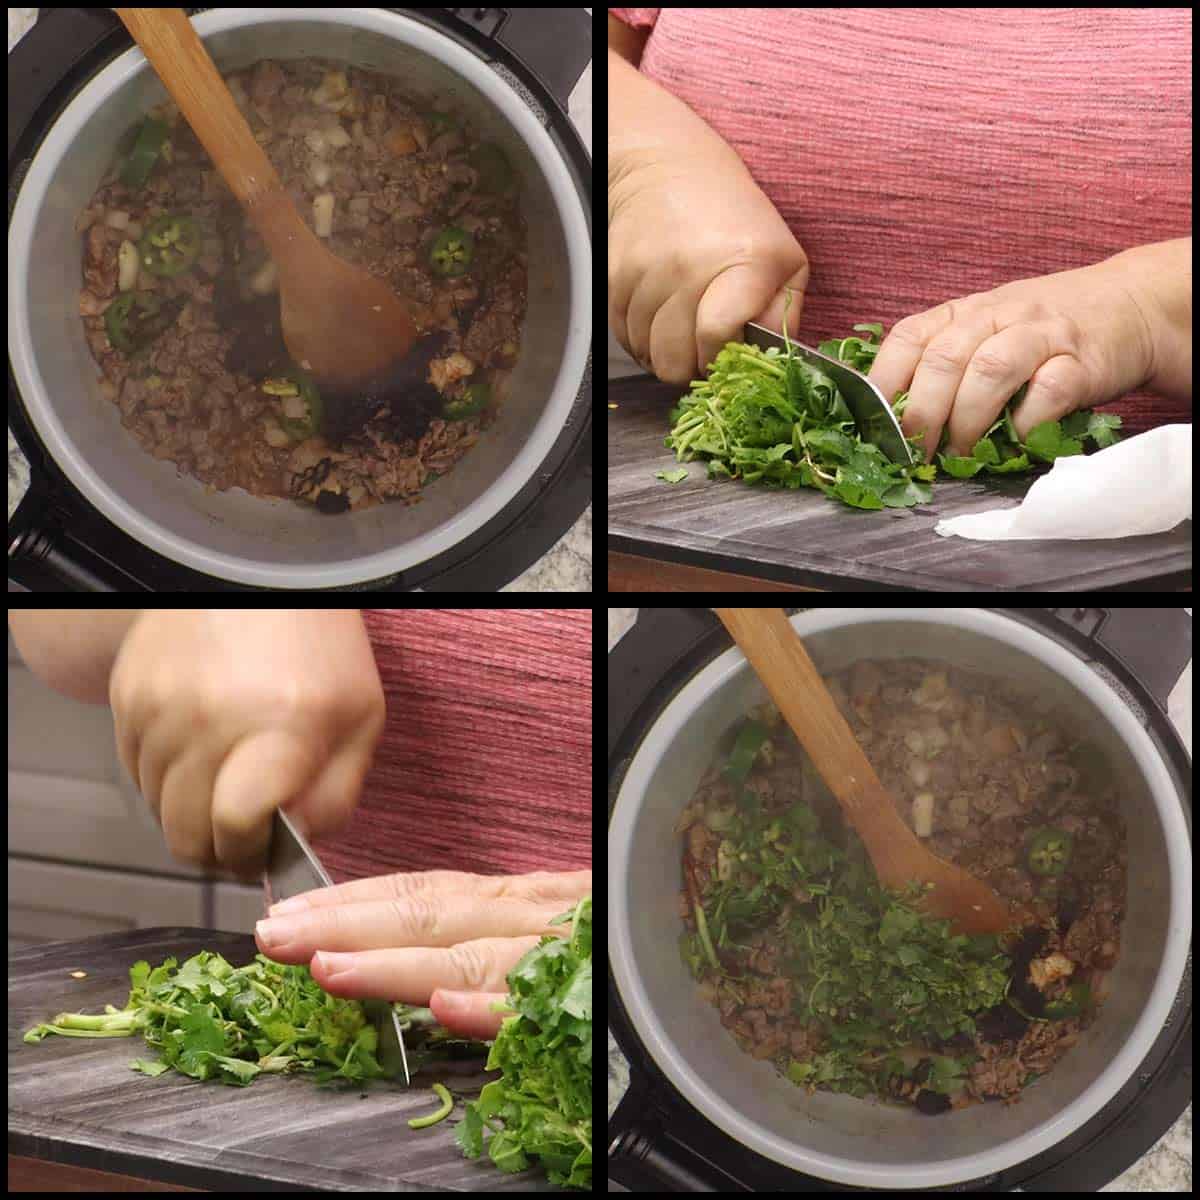 adding ancho pepper and cilantro stems to inner pot before pressure cooking.